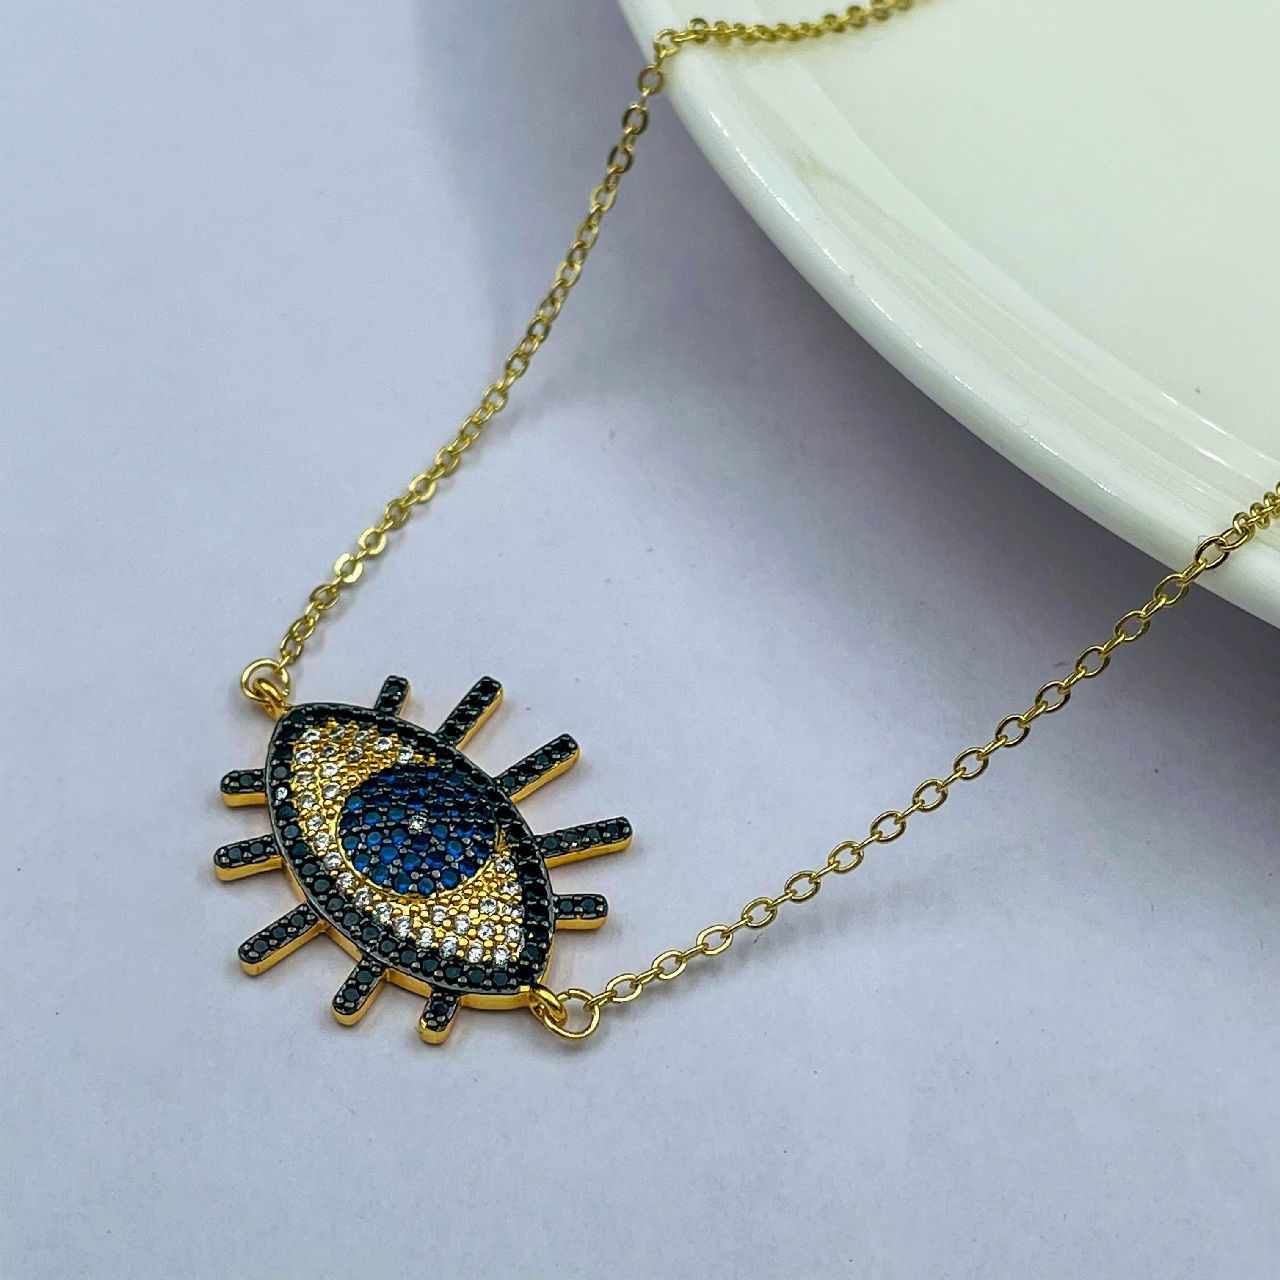 Copper American Diamonds Crystals Blue Black Gold Evil Eye Necklace Pendant Chain For Women Girls